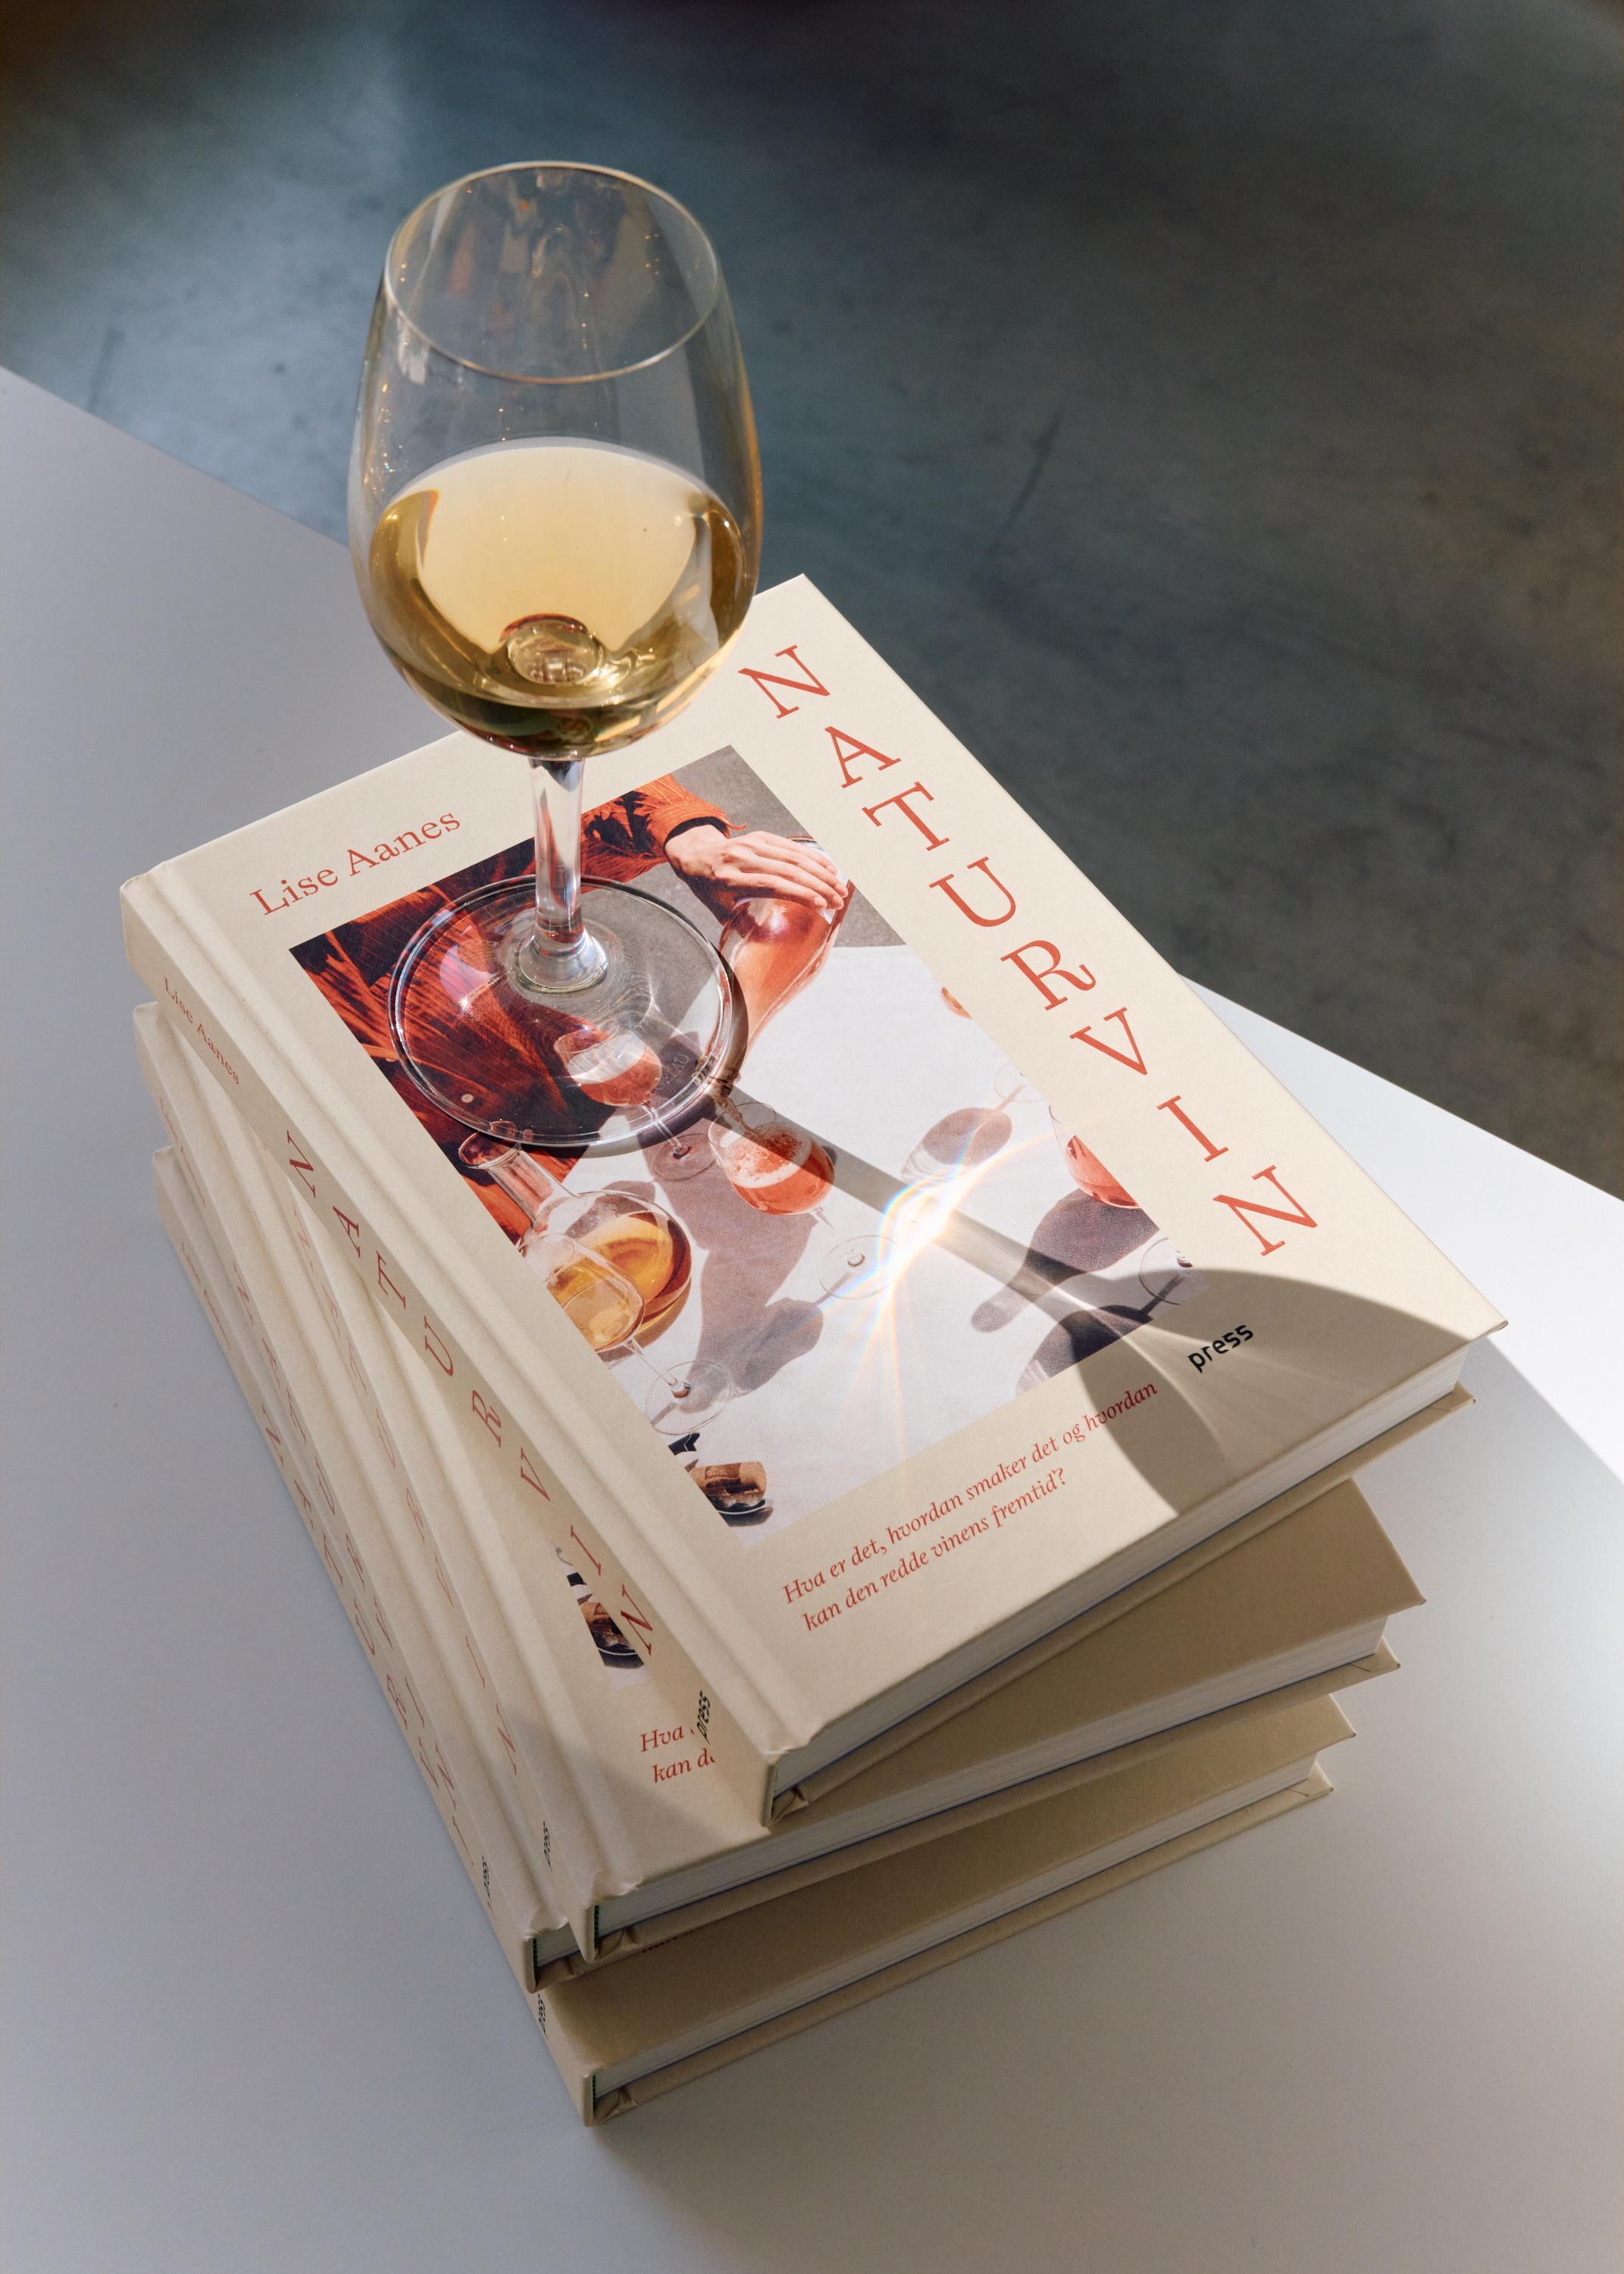 Photos of a book about natural wine